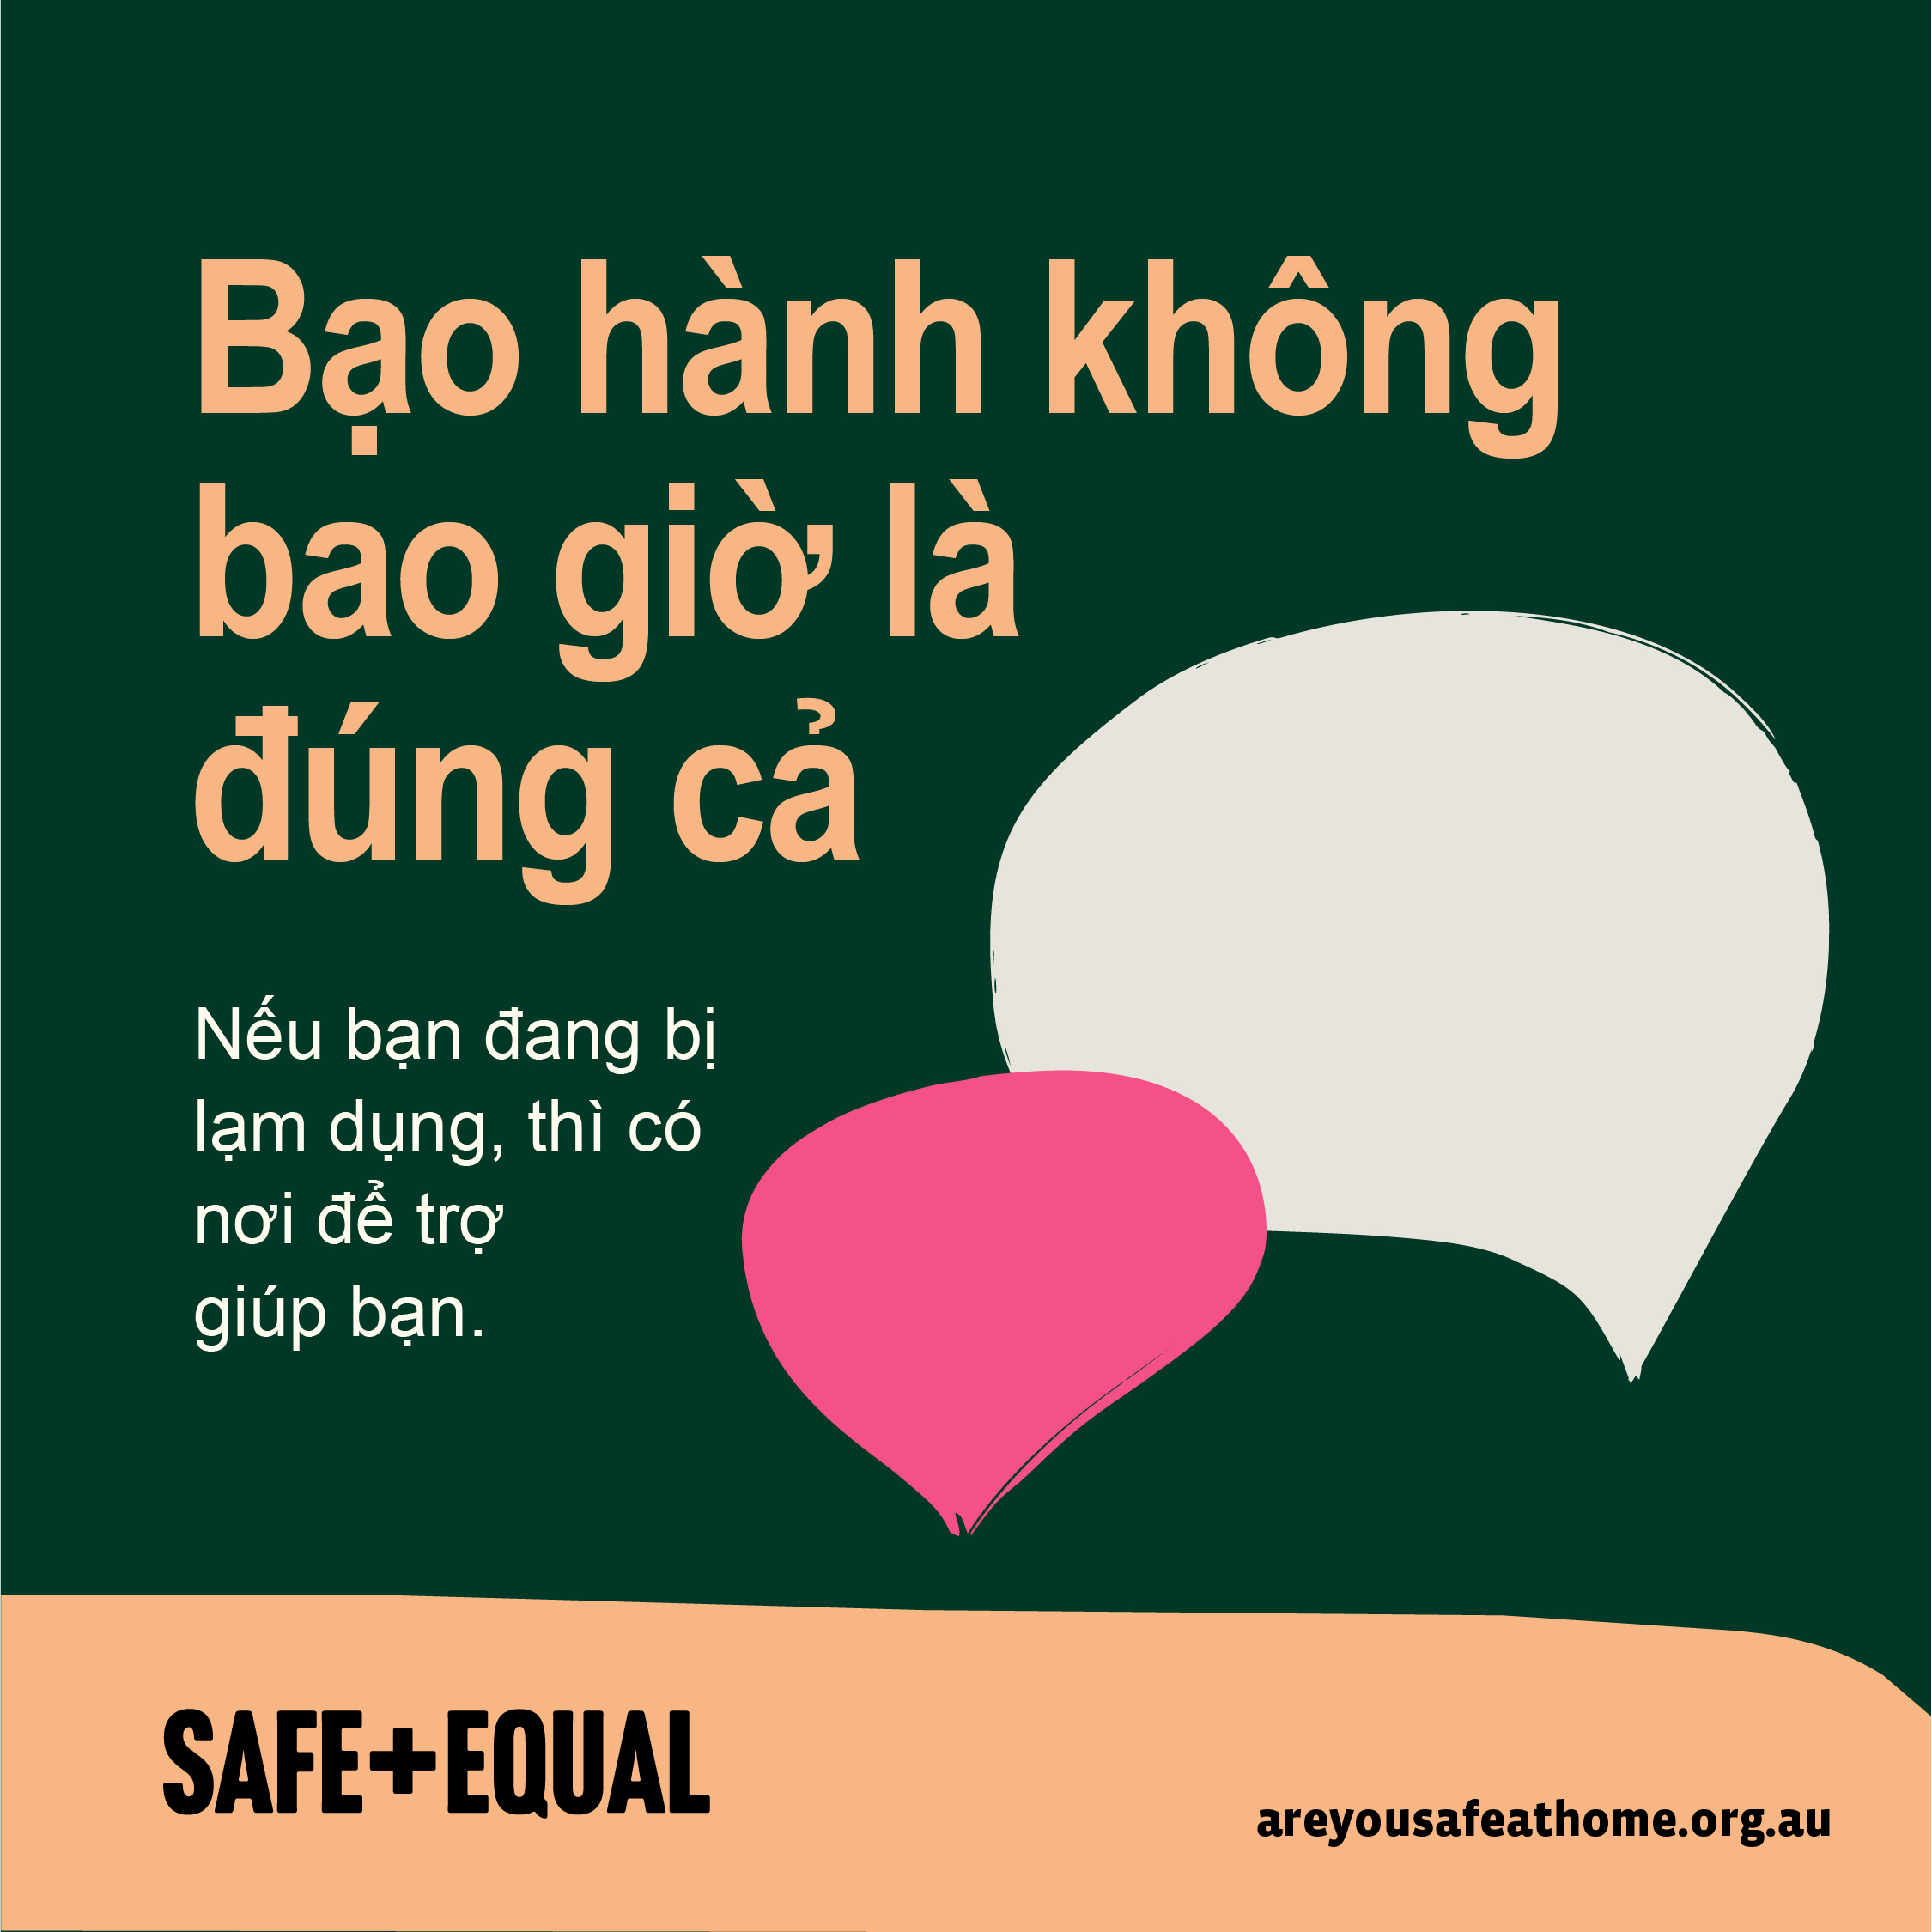 Social media tile for Are you safe at home translated into Vietnamese